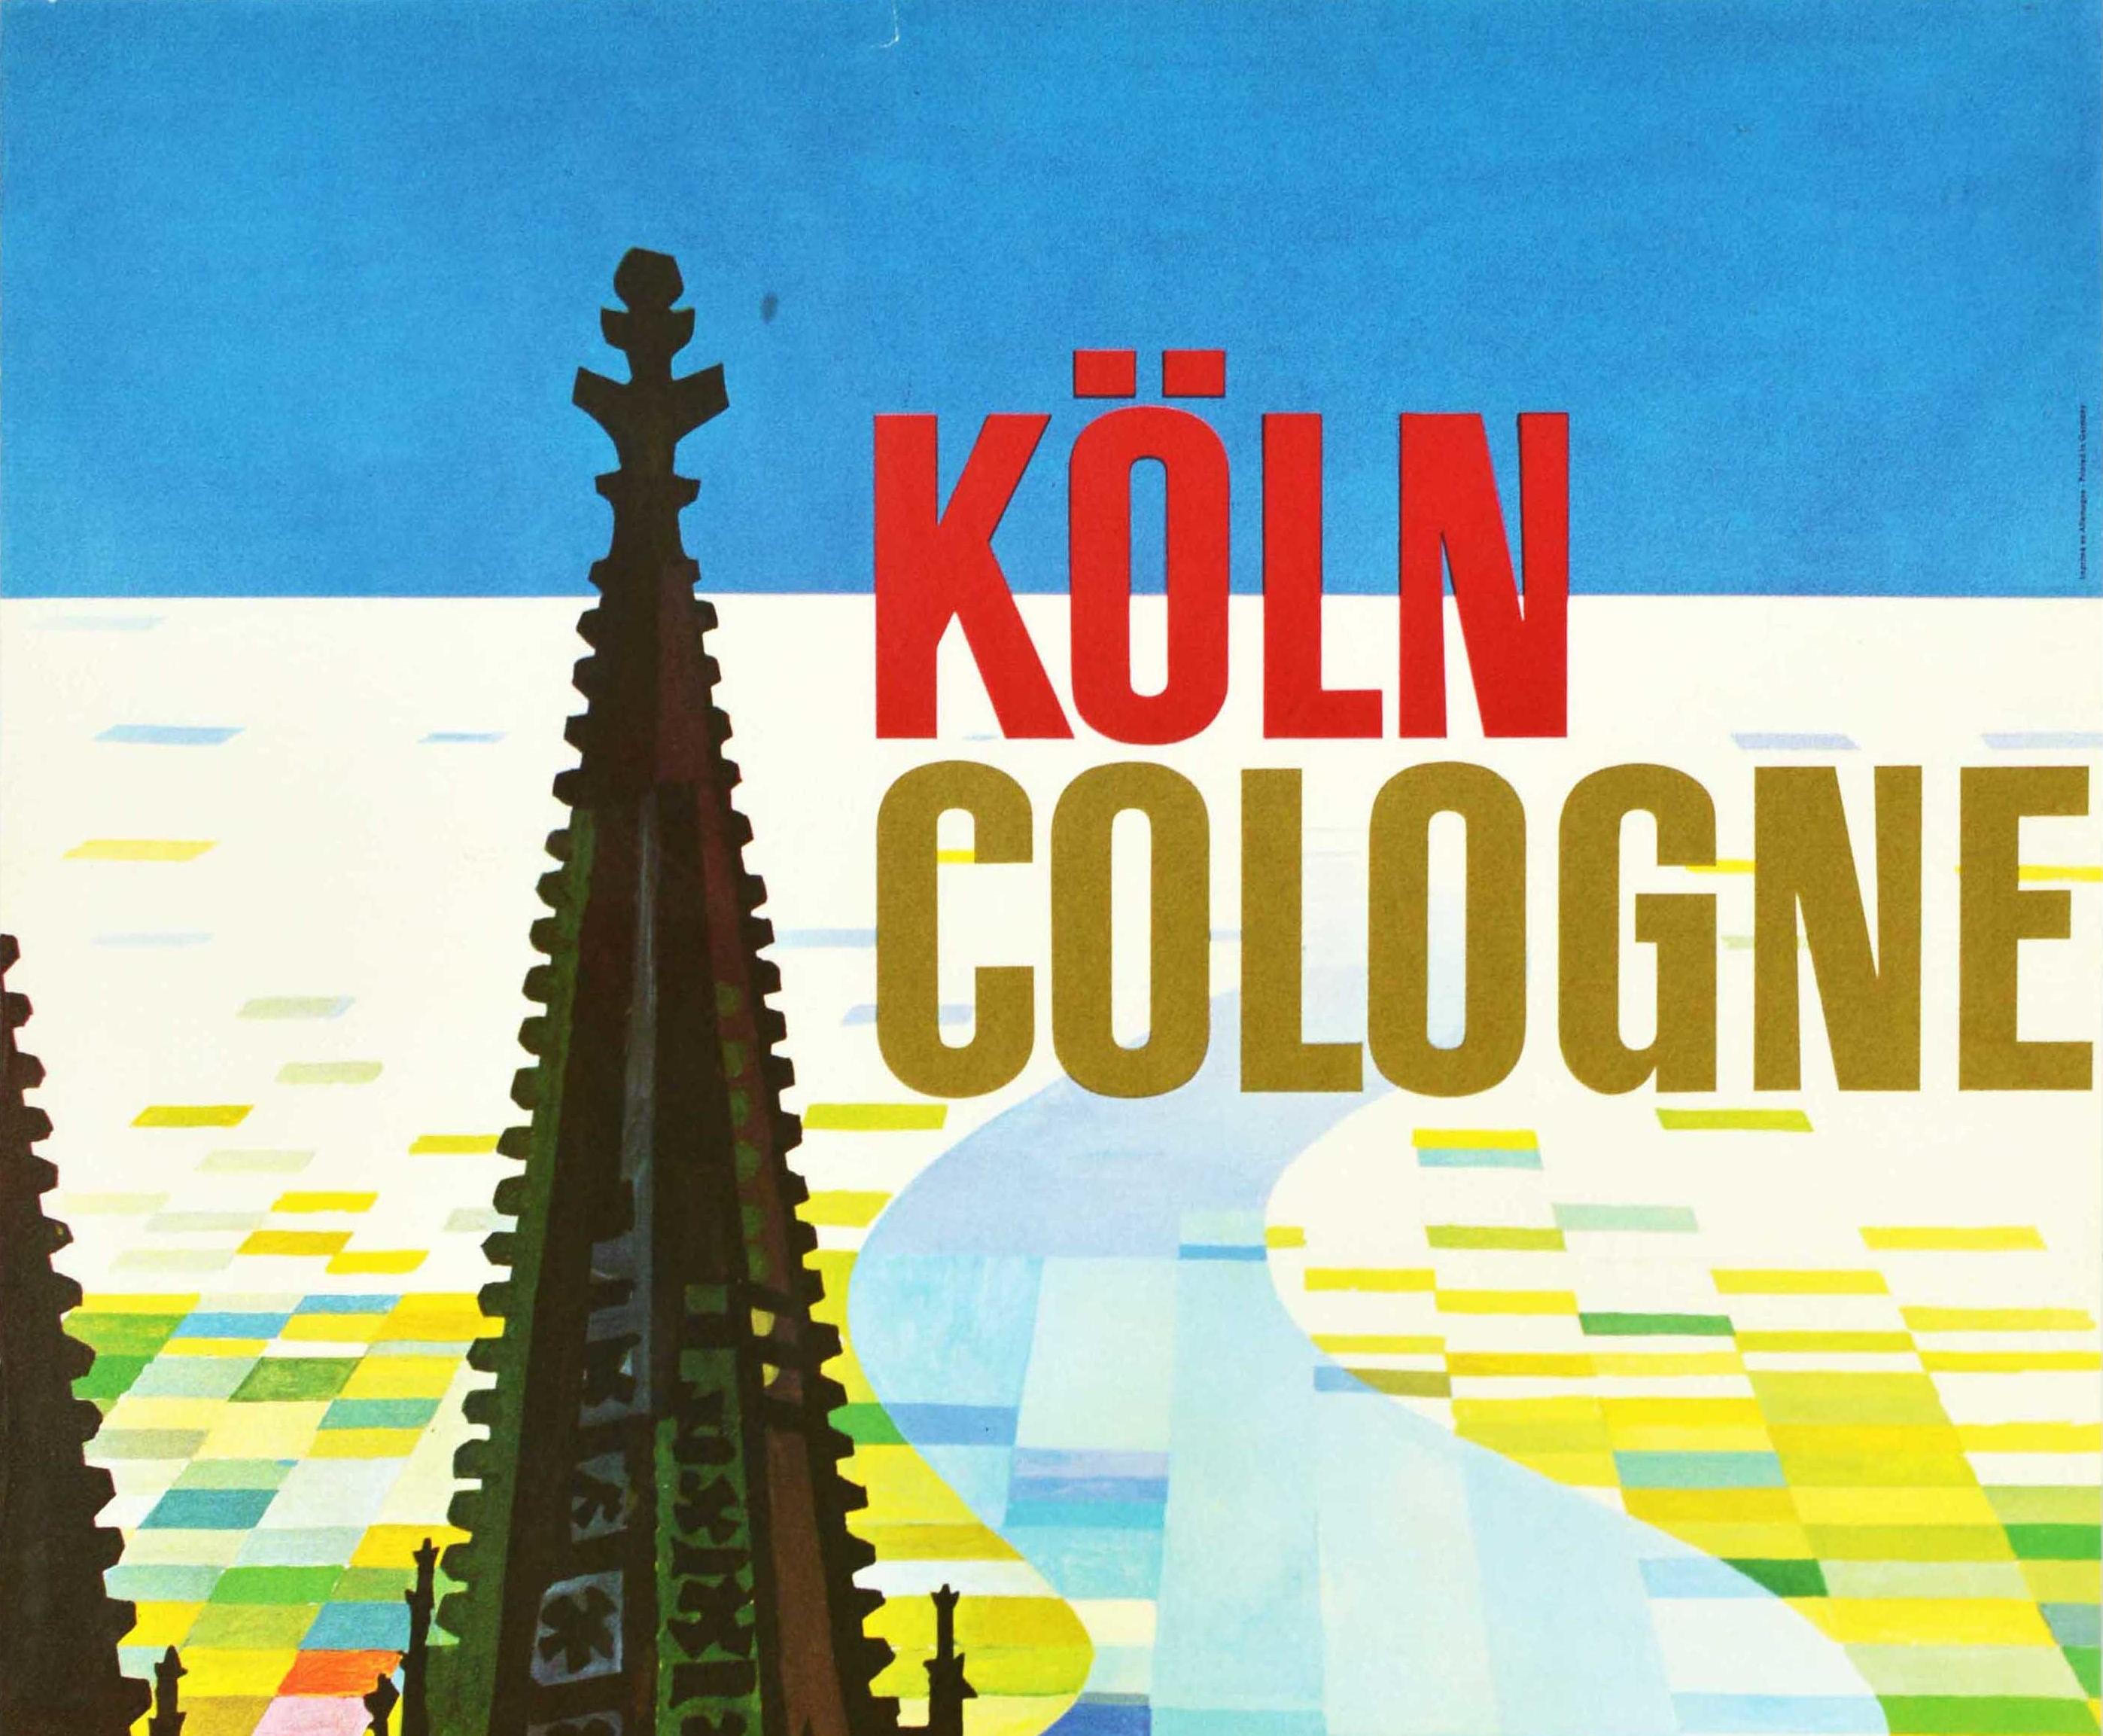 Original Vintage Travel Poster Koln Cologne Cathedral Germany Mid-Century Modern - Print by Werner Labbe